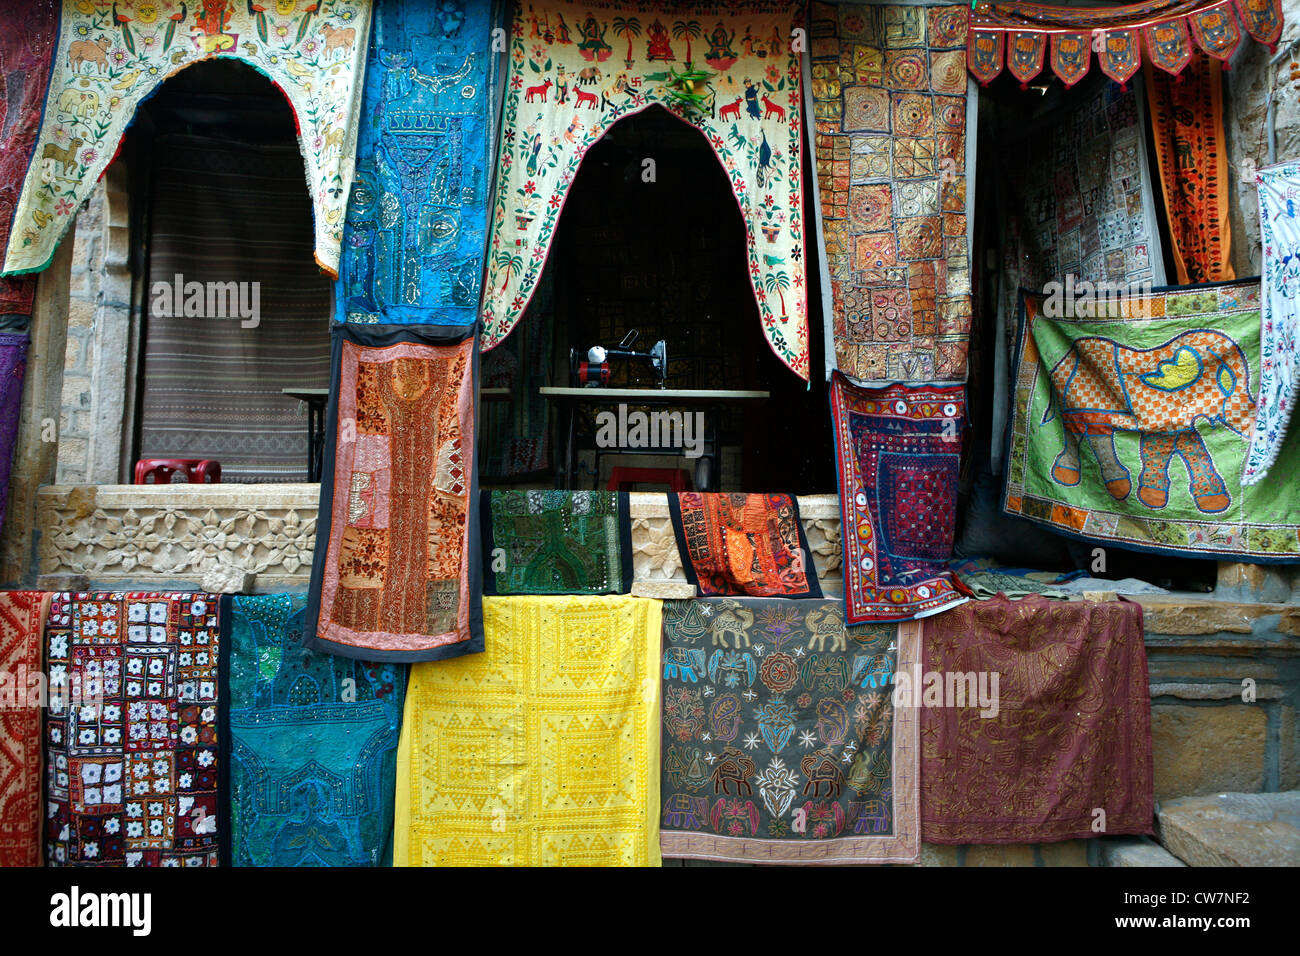 embroideried wall hangings on display at Jaisalmer fort, Rajasthan, India Stock Photo